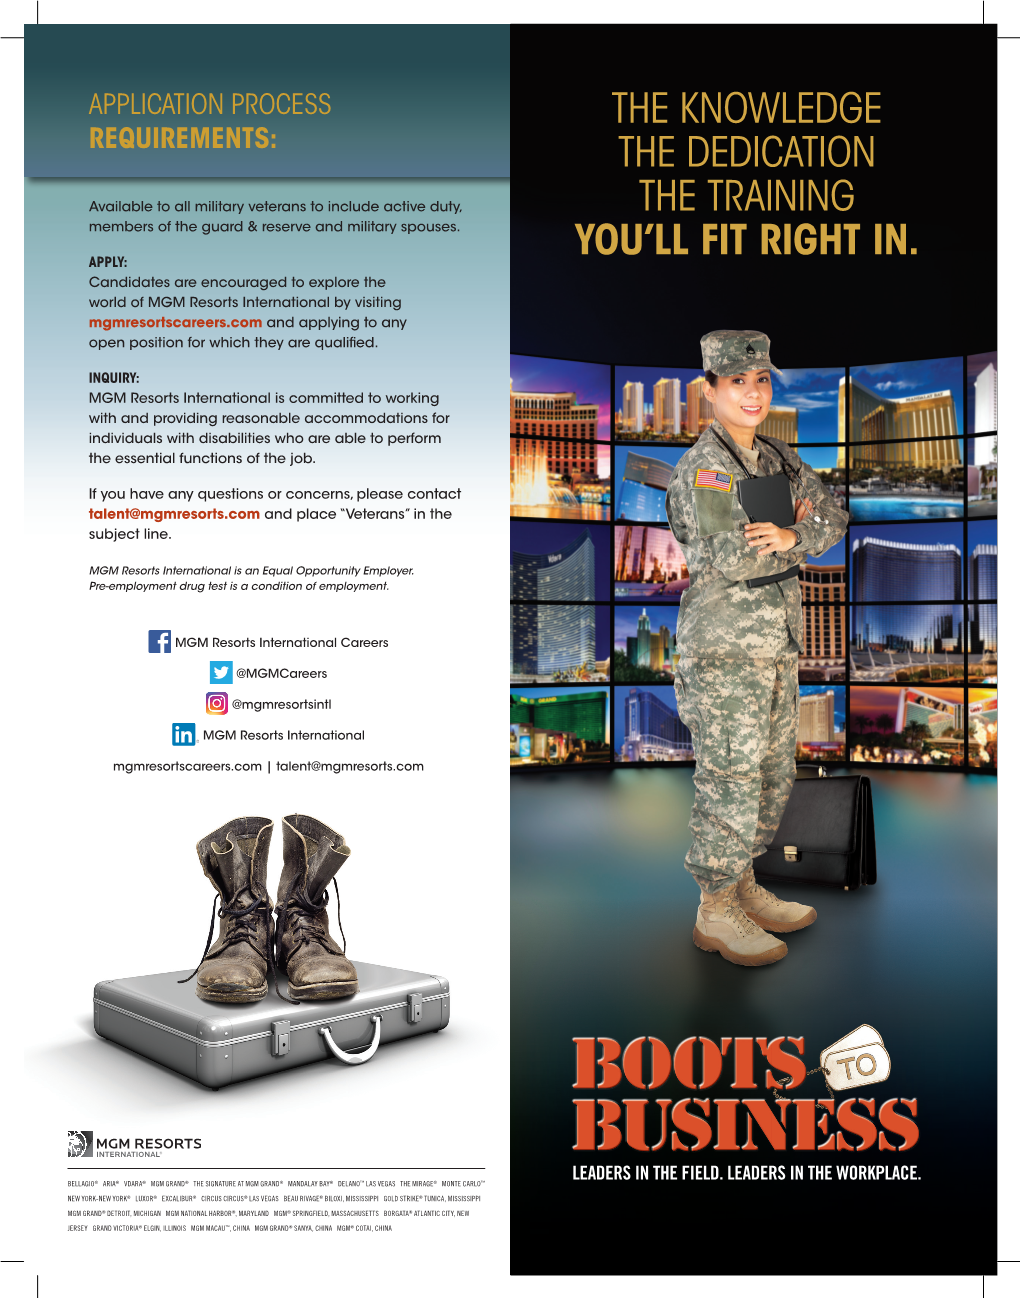 Boots to Business Includes